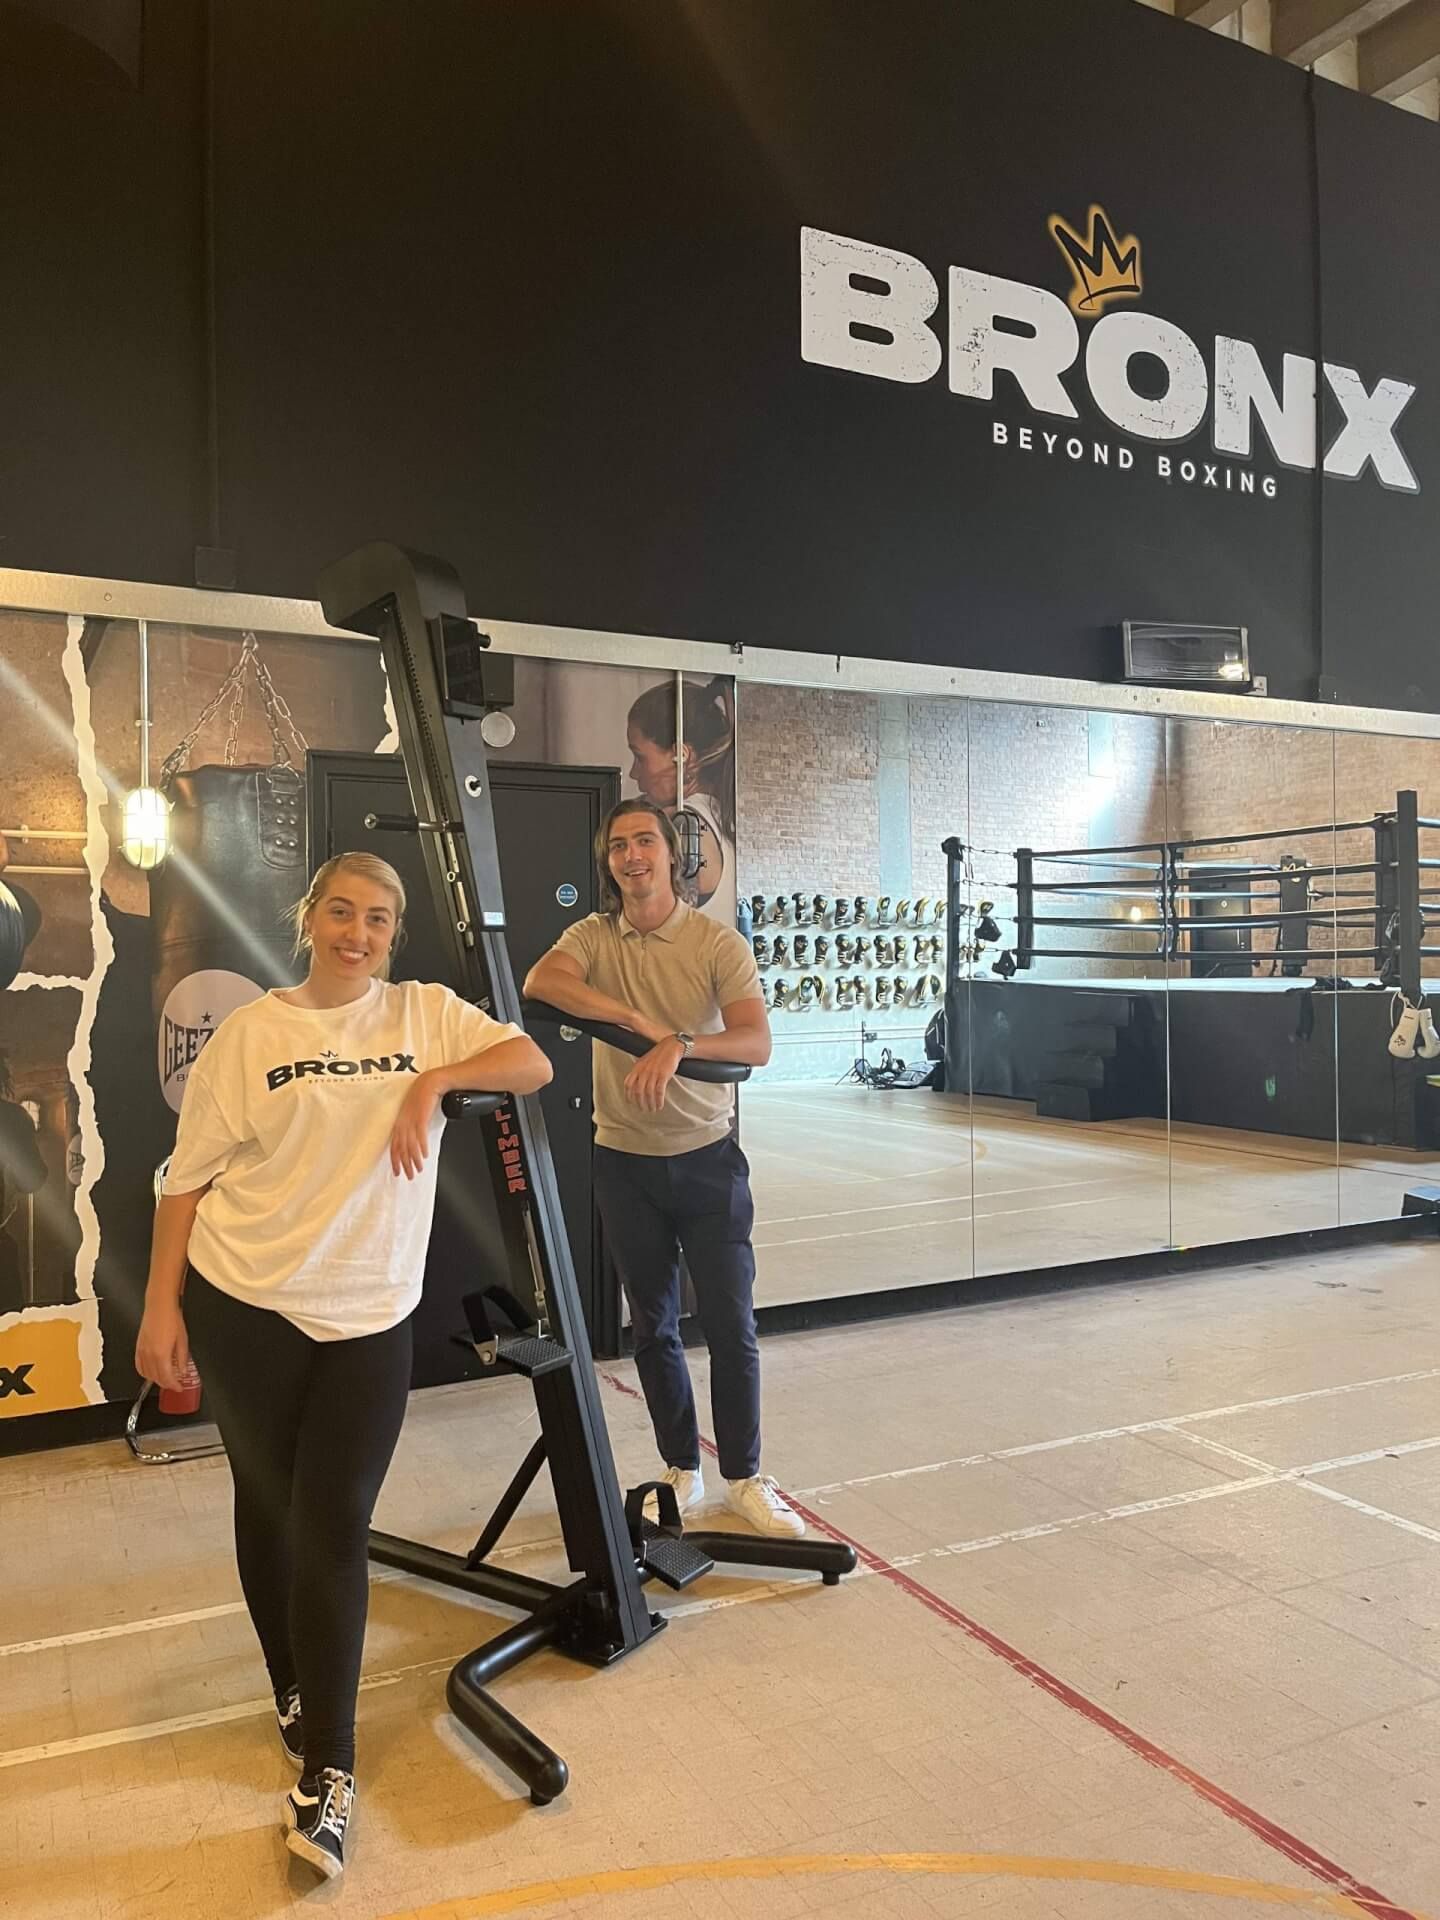 <p>An interview with The Apprentice winner Marnie Swindells: Her partnership with Versaclimber, life after TV and plans to change the boxing world</p>
